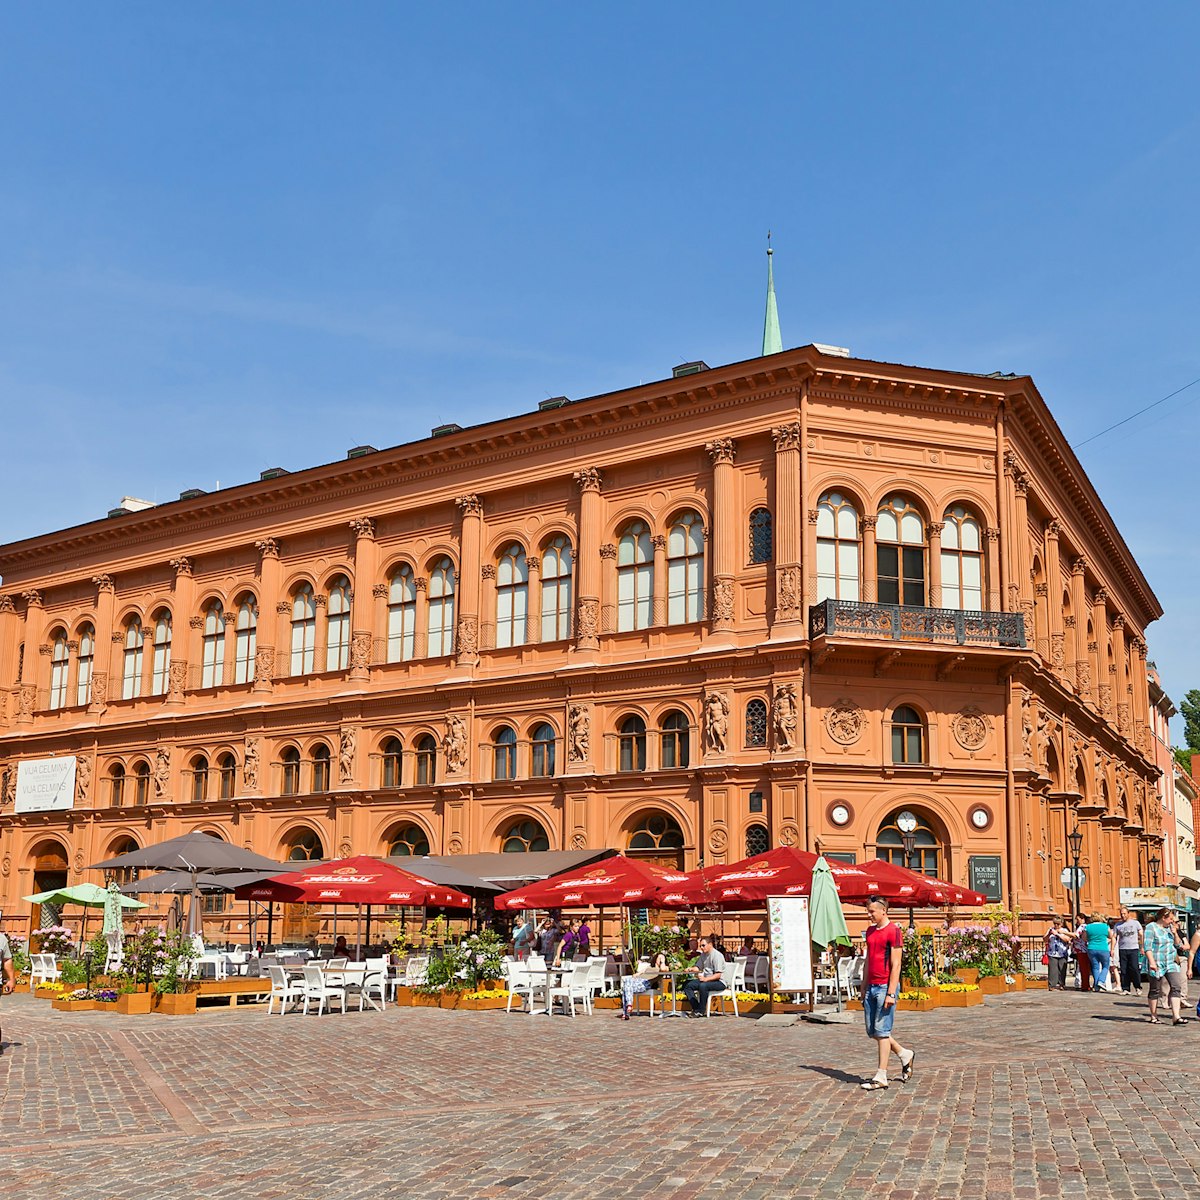 RIGA, LATVIA - MAY 25, 2014: Art Museum Riga Bourse (circa 1855) on Doms square. National architectural monument of Latvia, UNESCO world heritage site. Architect Harald Julius von Bosse; Shutterstock ID 197314394; Your name (First / Last): Gemma Graham; GL account no.: 65050; Netsuite department name: Online Editorial; Full Product or Project name including edition: 100 Cities Guides app image downloads